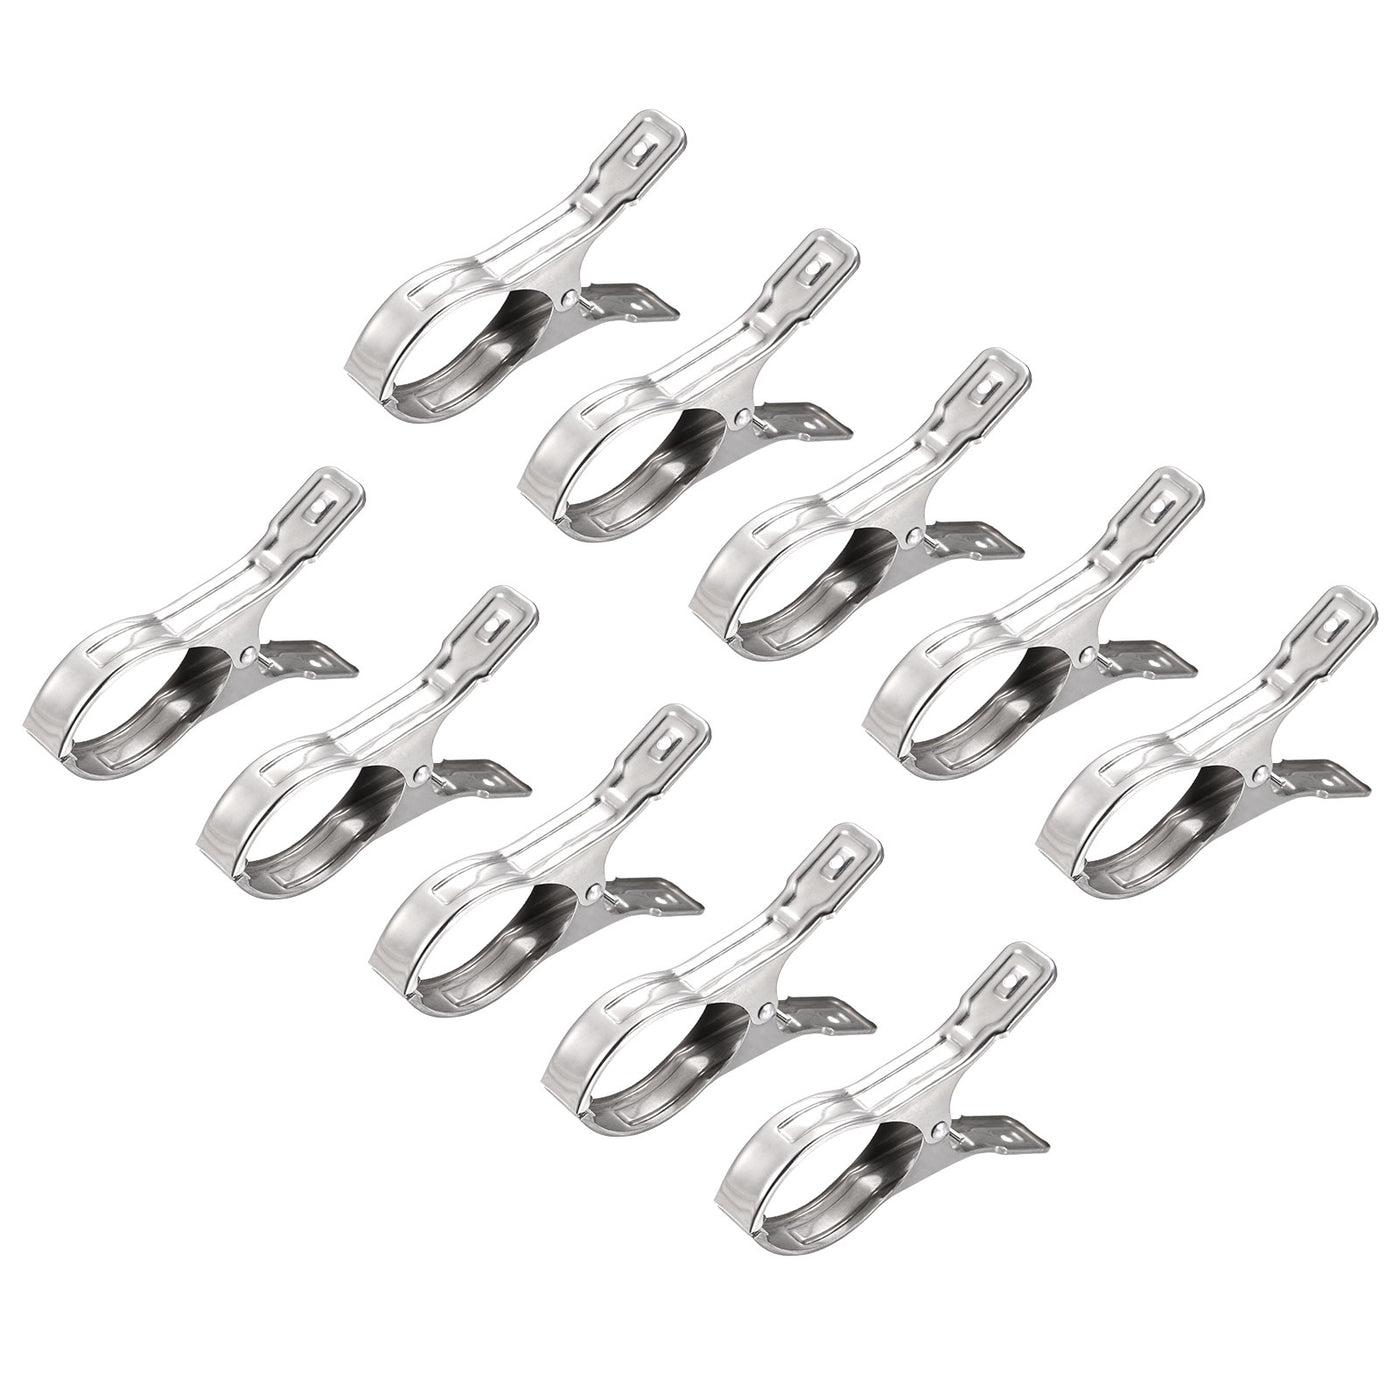 uxcell Uxcell Tablecloth Clips - 145mm Stainless Steel Clamps for Fixing Table Cloth Hanging Clothes, 10 Pcs